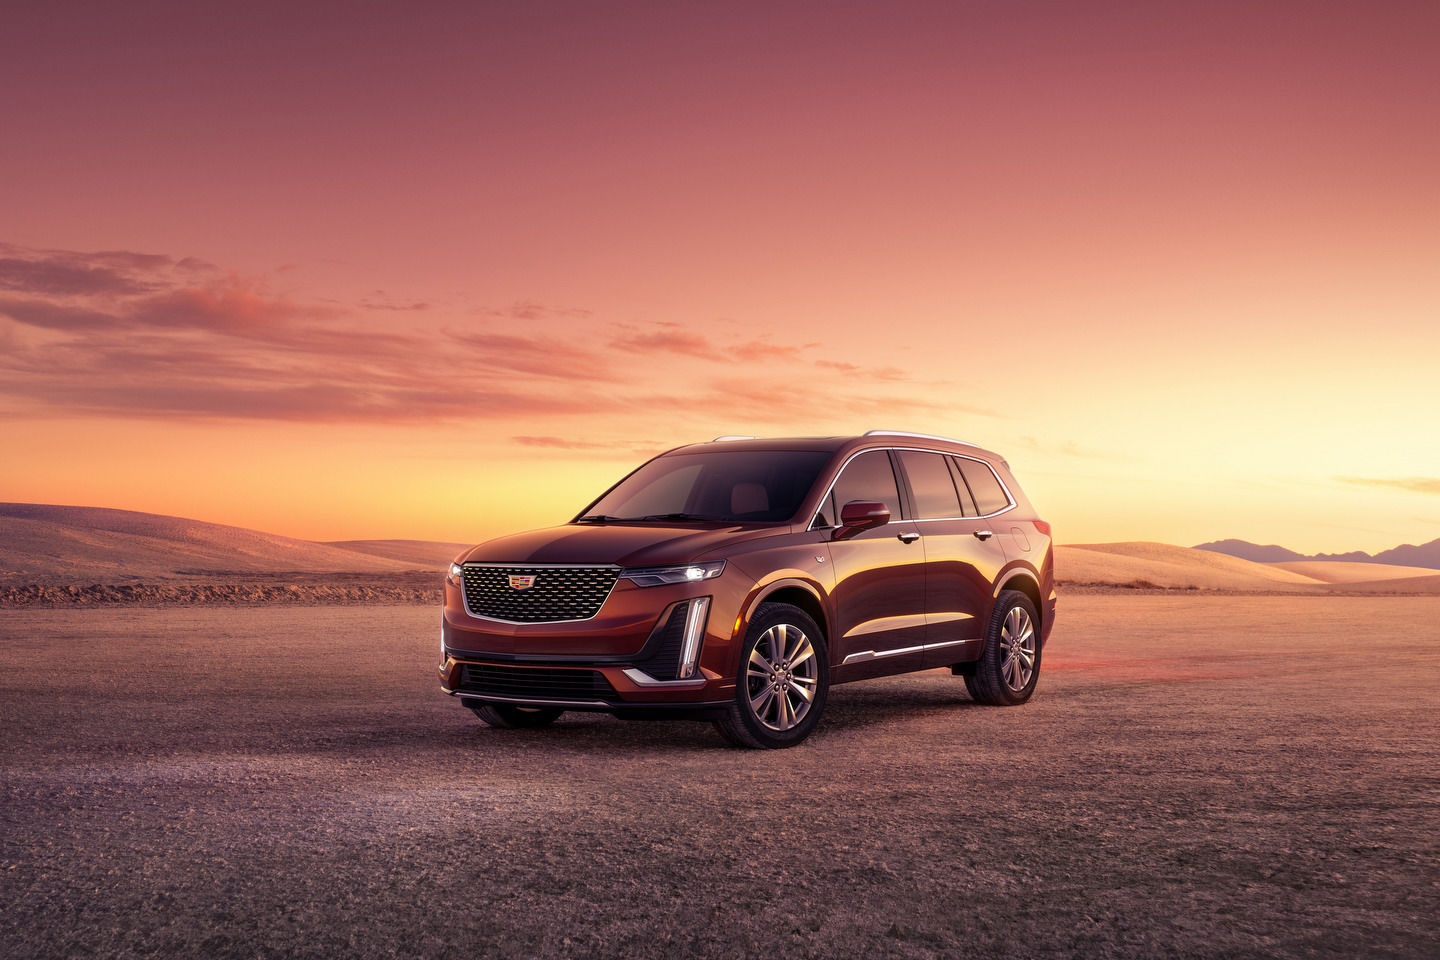 2023 Cadillac XT6: The Midsize Luxury SUV Has a Lot to Offer